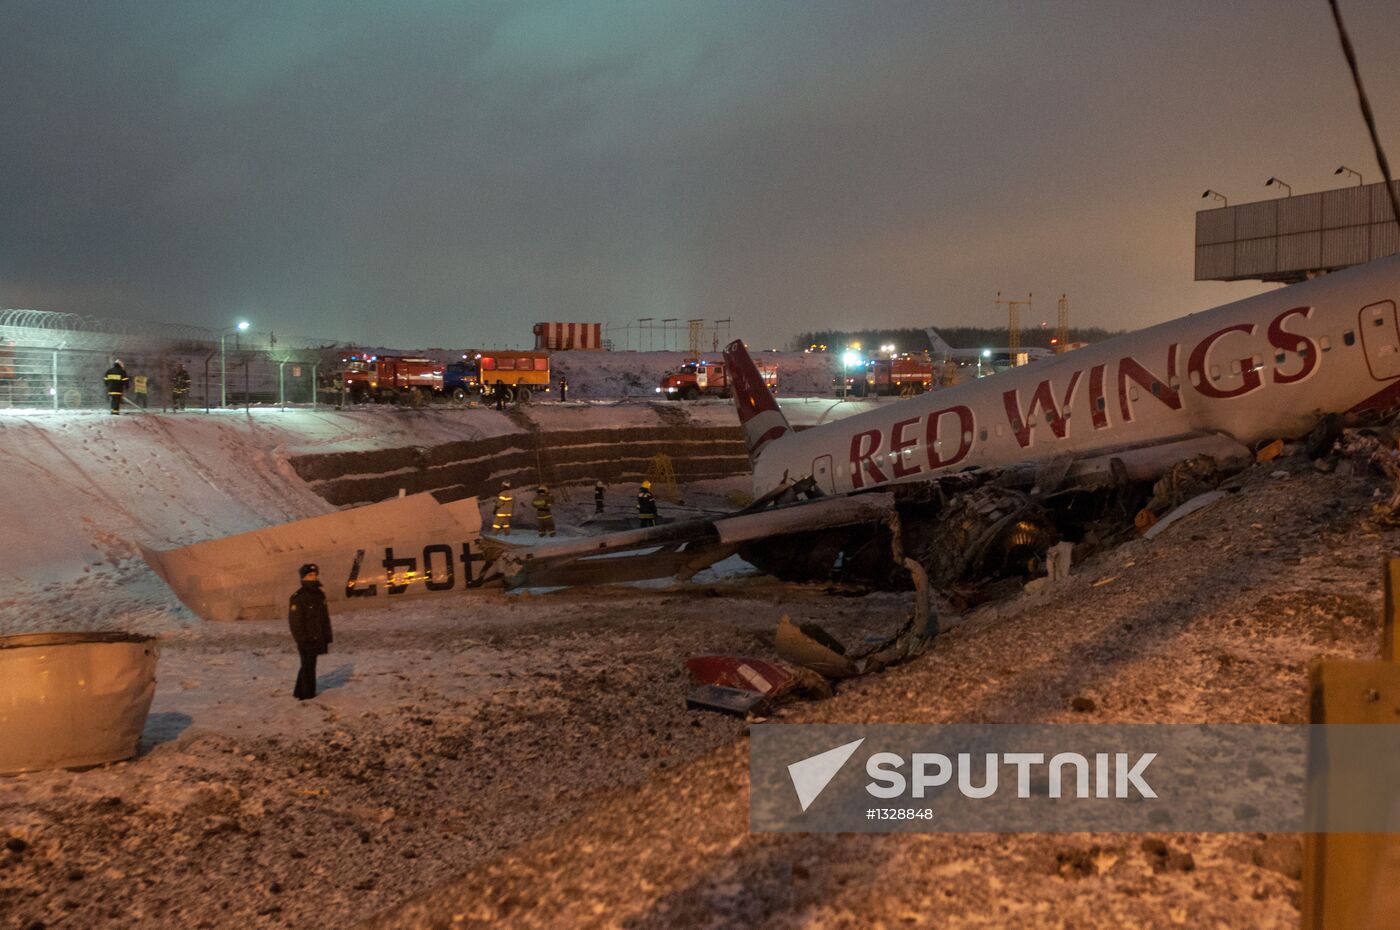 Tu-204 plane skids off runway and catches fire in Vnukovo